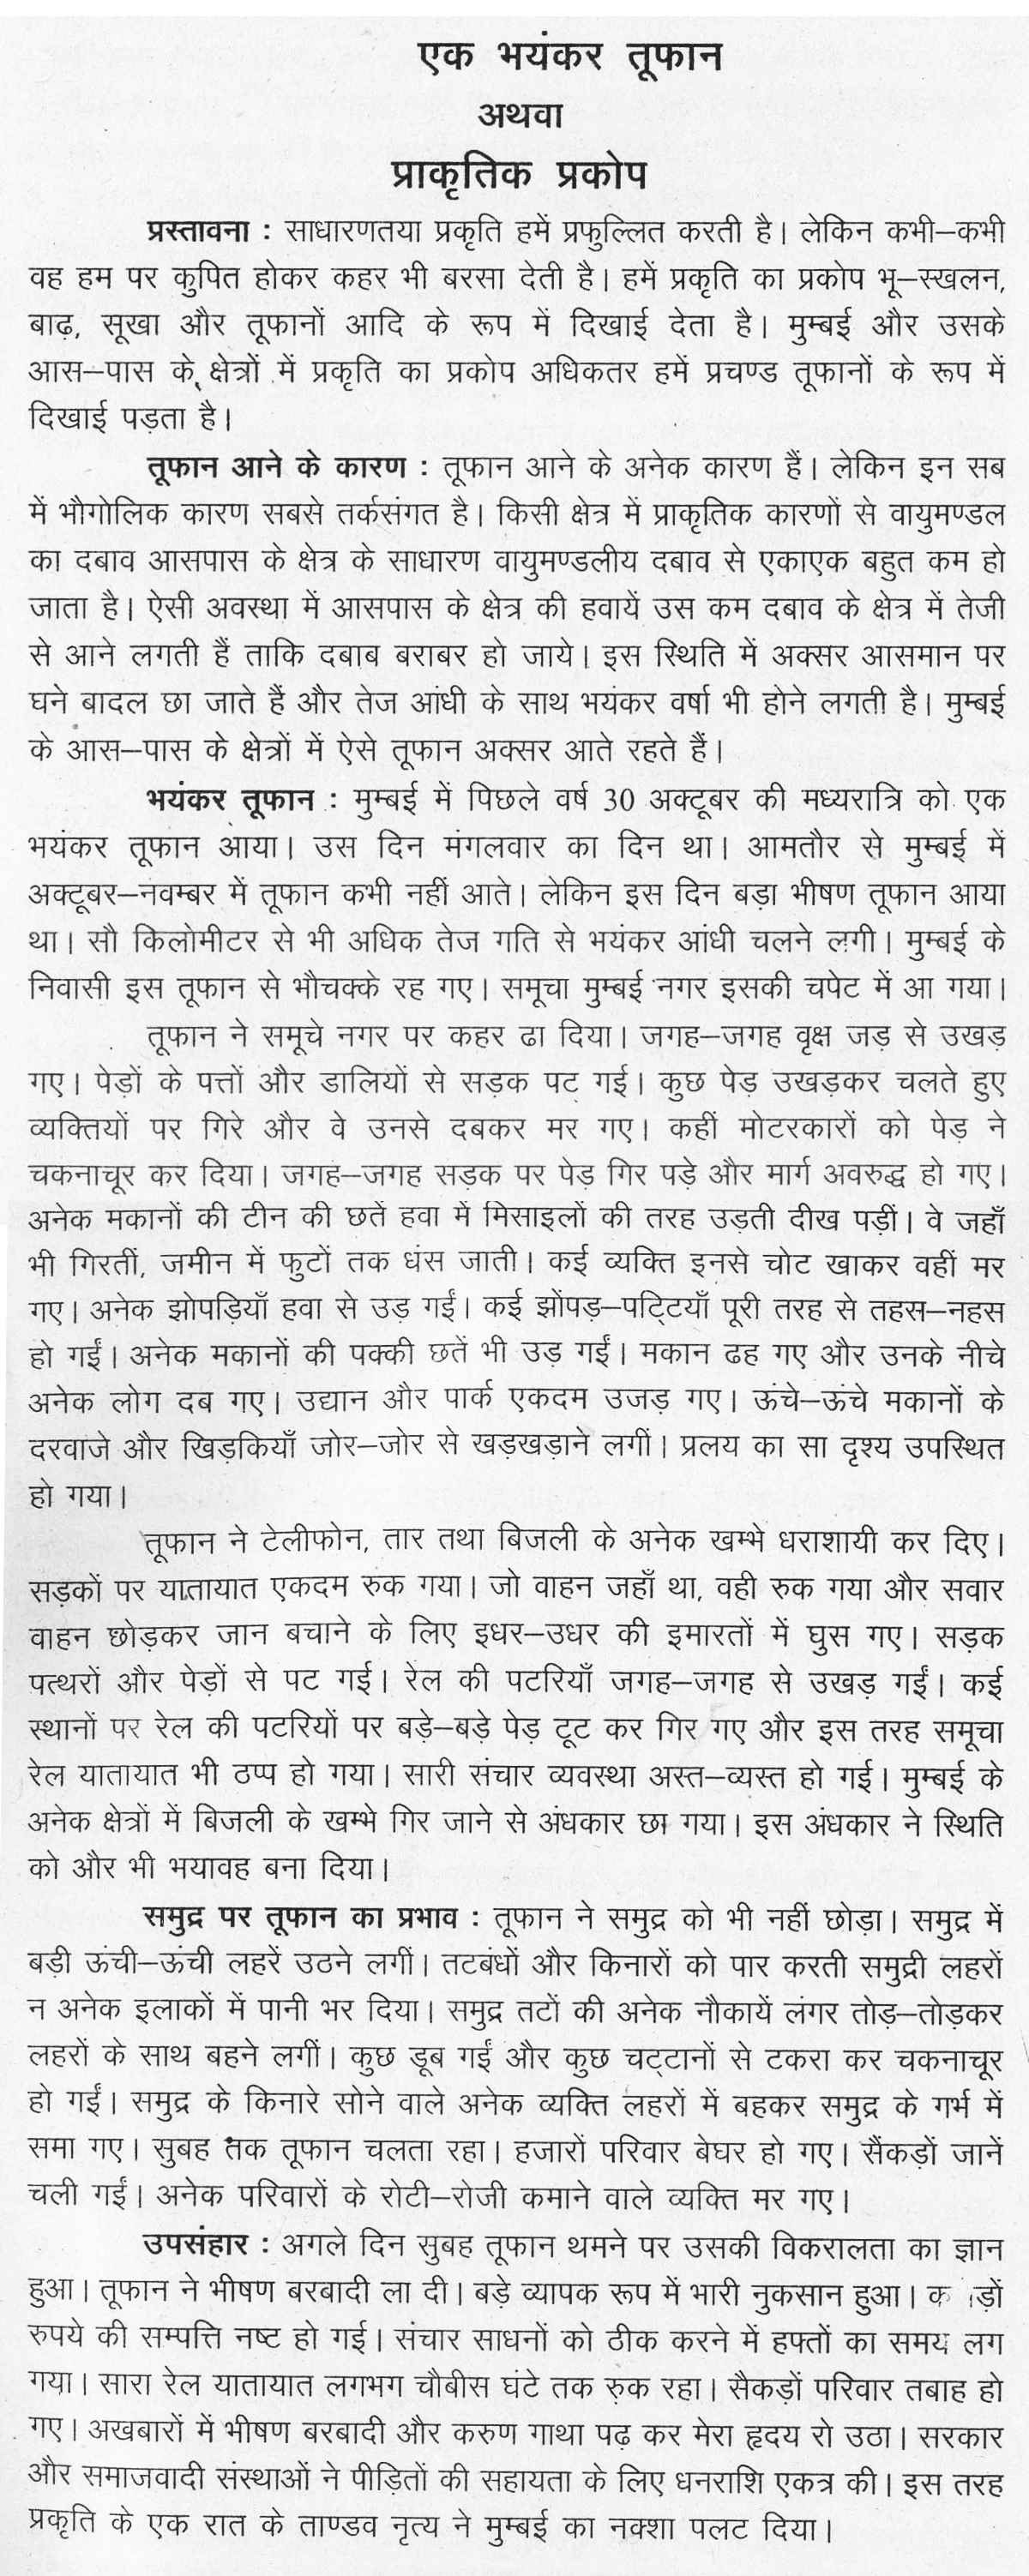 Long essay on nature in hindi